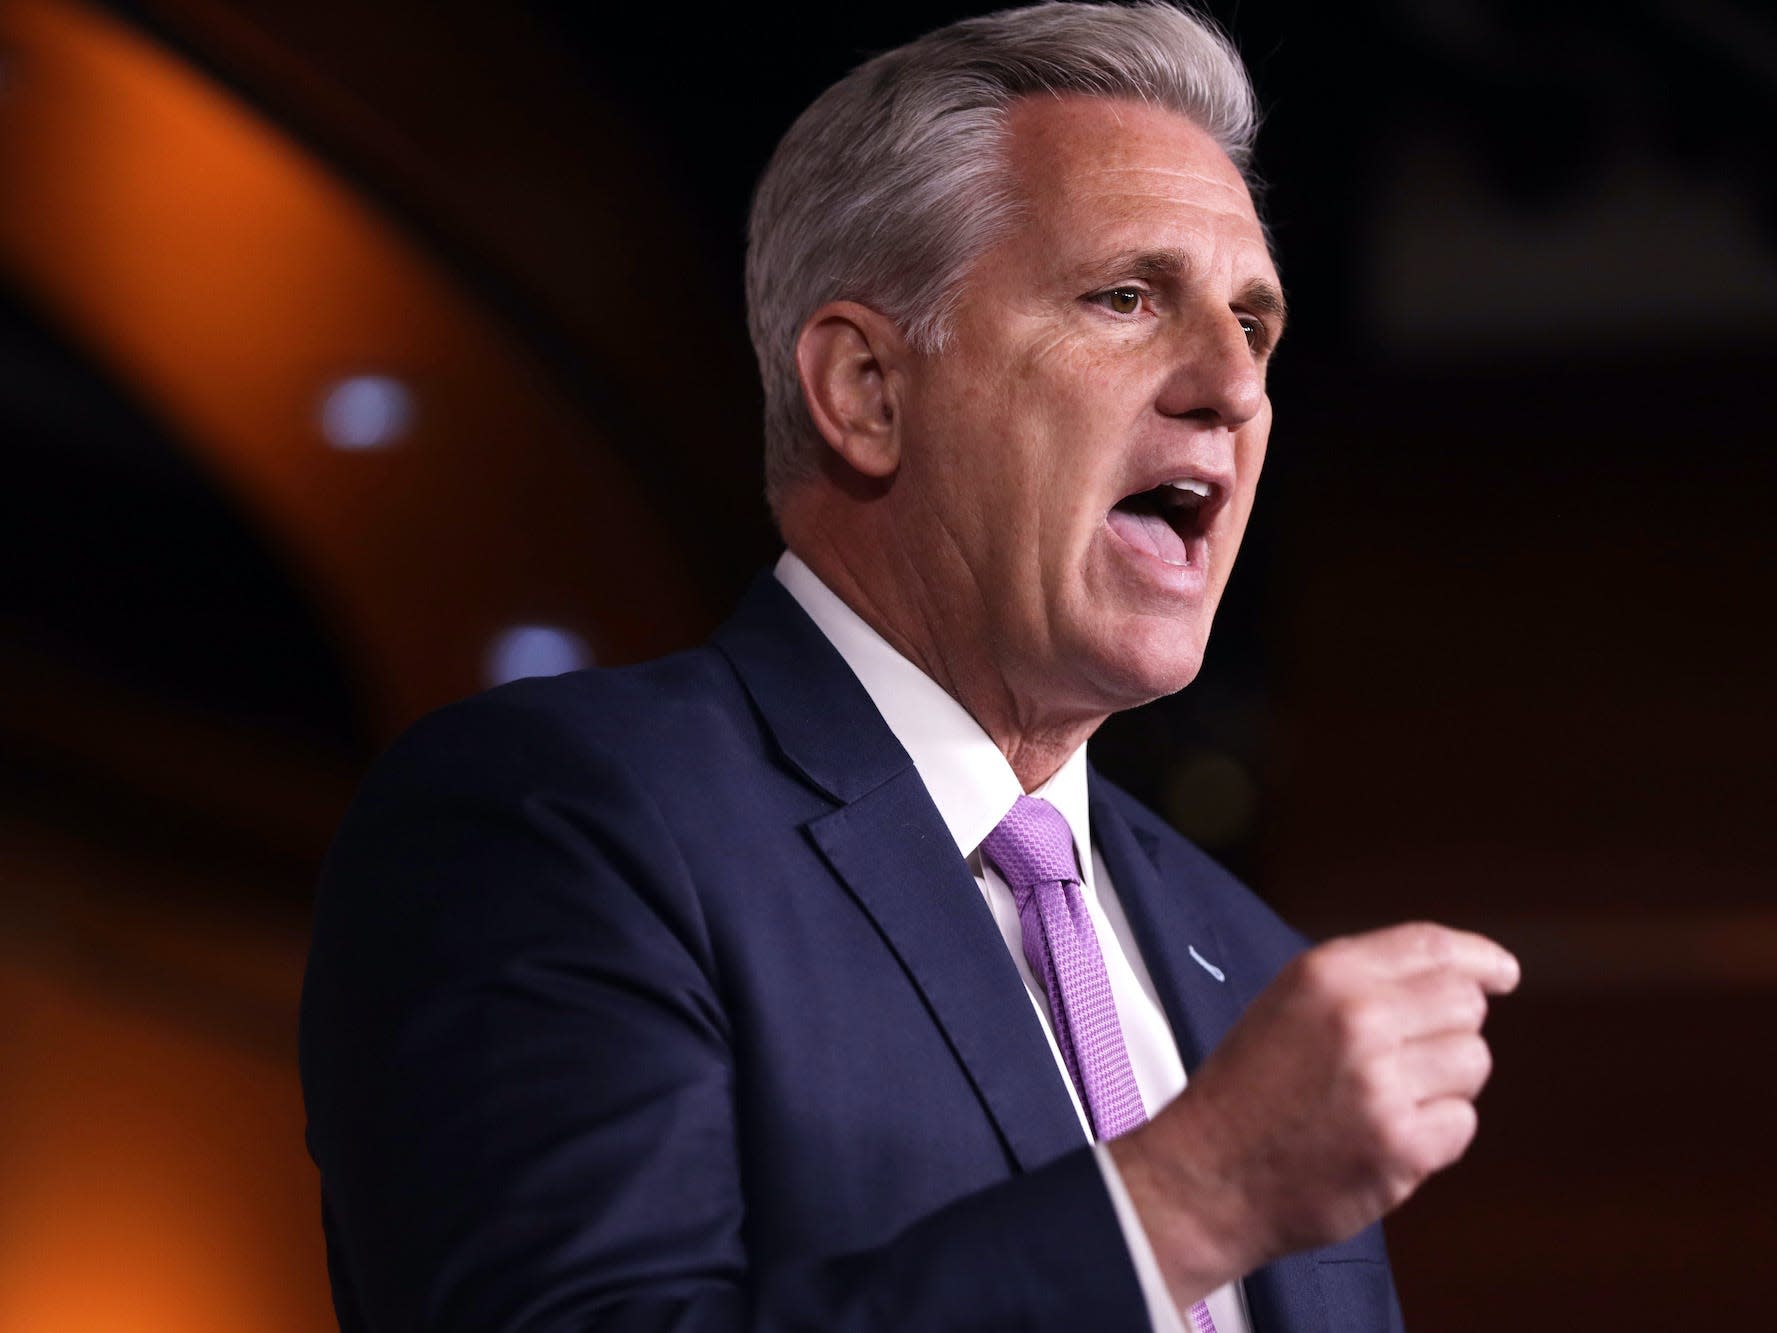 Republican MP Kevin McCarthy said he would bet his ‘personal home’ that Republicans would ‘get the majority back’ in 2022